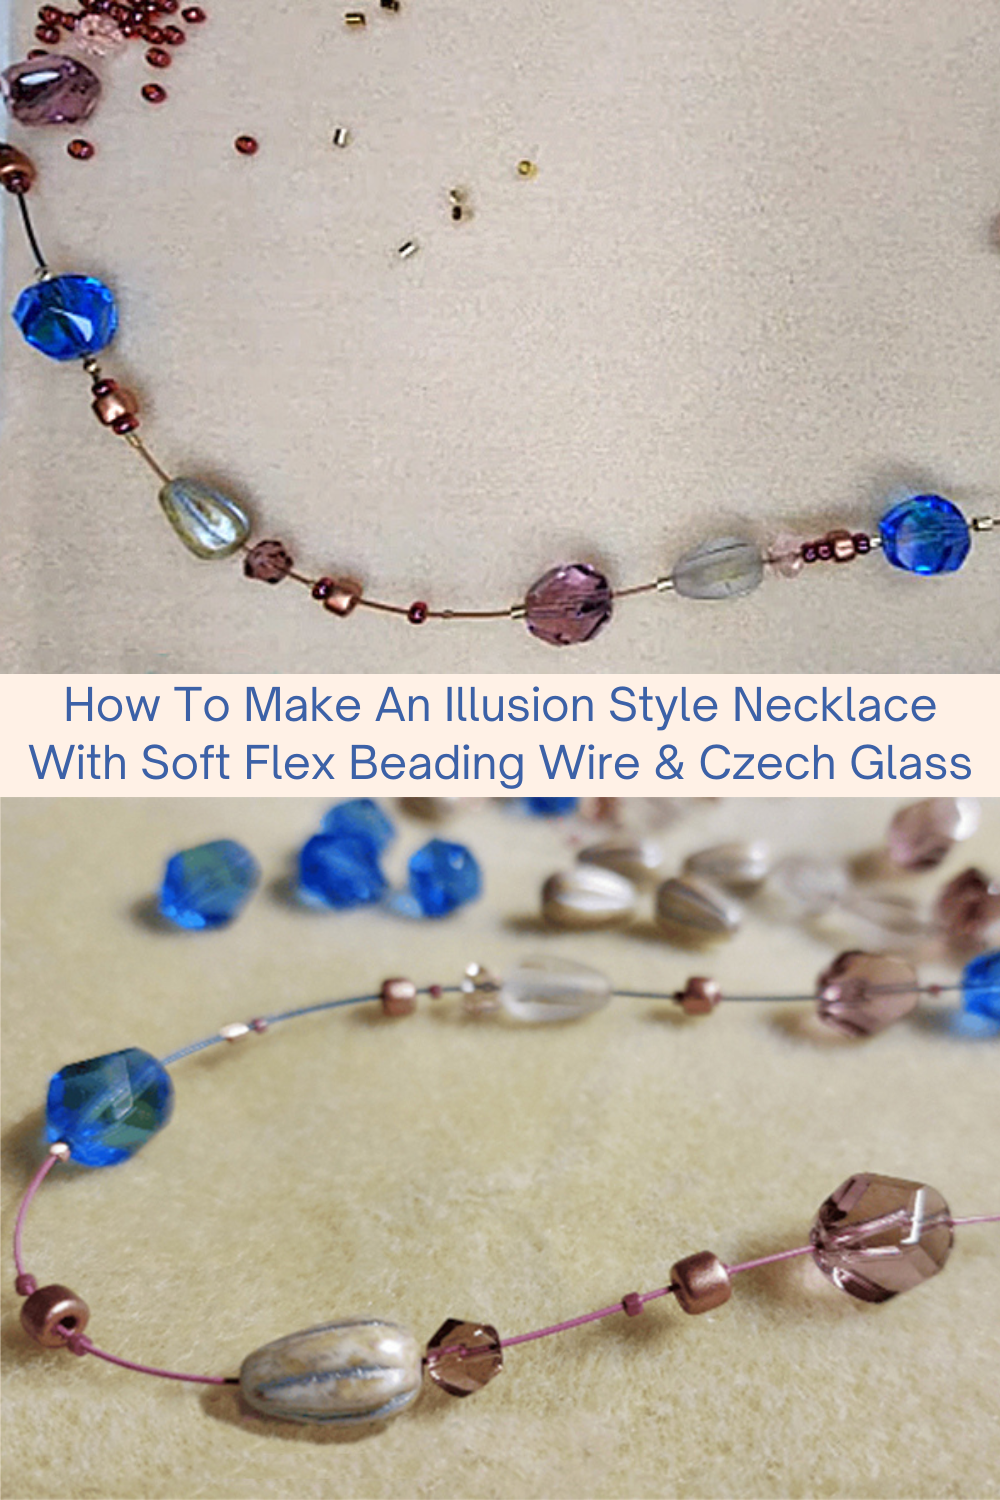 How To Make An Illusion Style Necklace With Soft Flex Beading Wire & Czech  Glass - Soft Flex Company